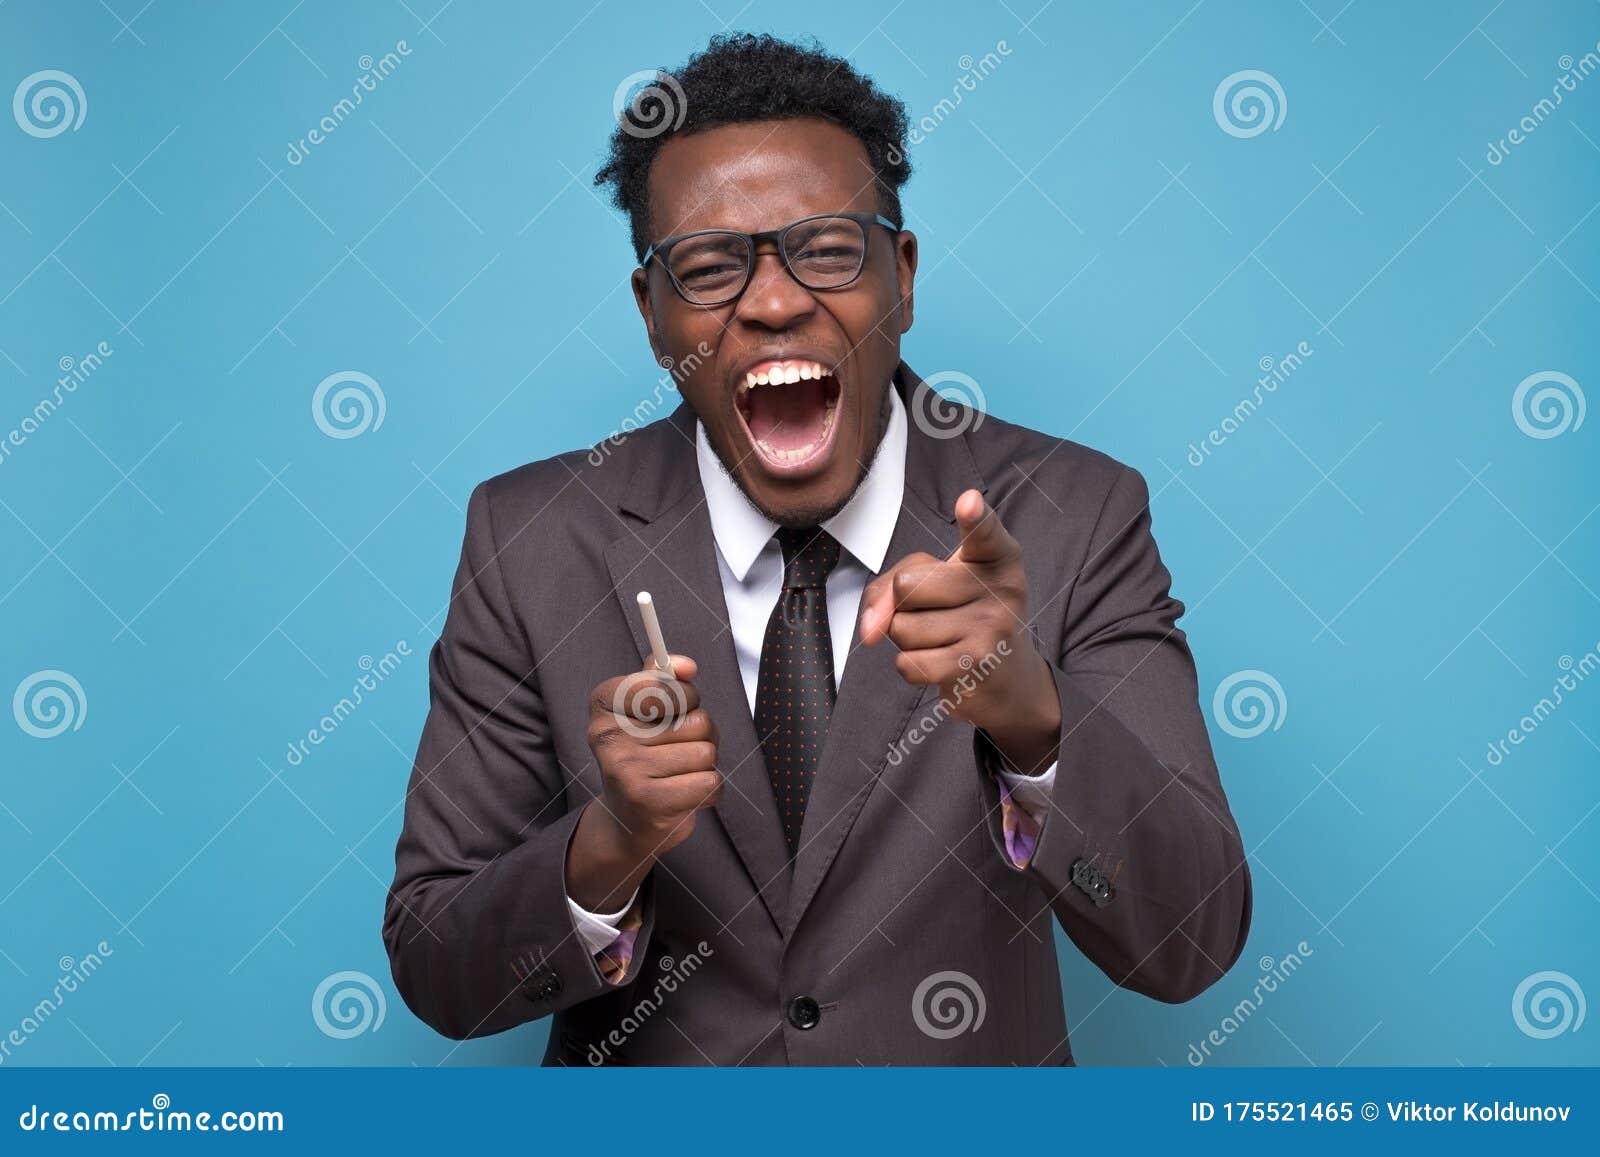 Laughing African American Man is Laughing on Your Joke Over Blue ...